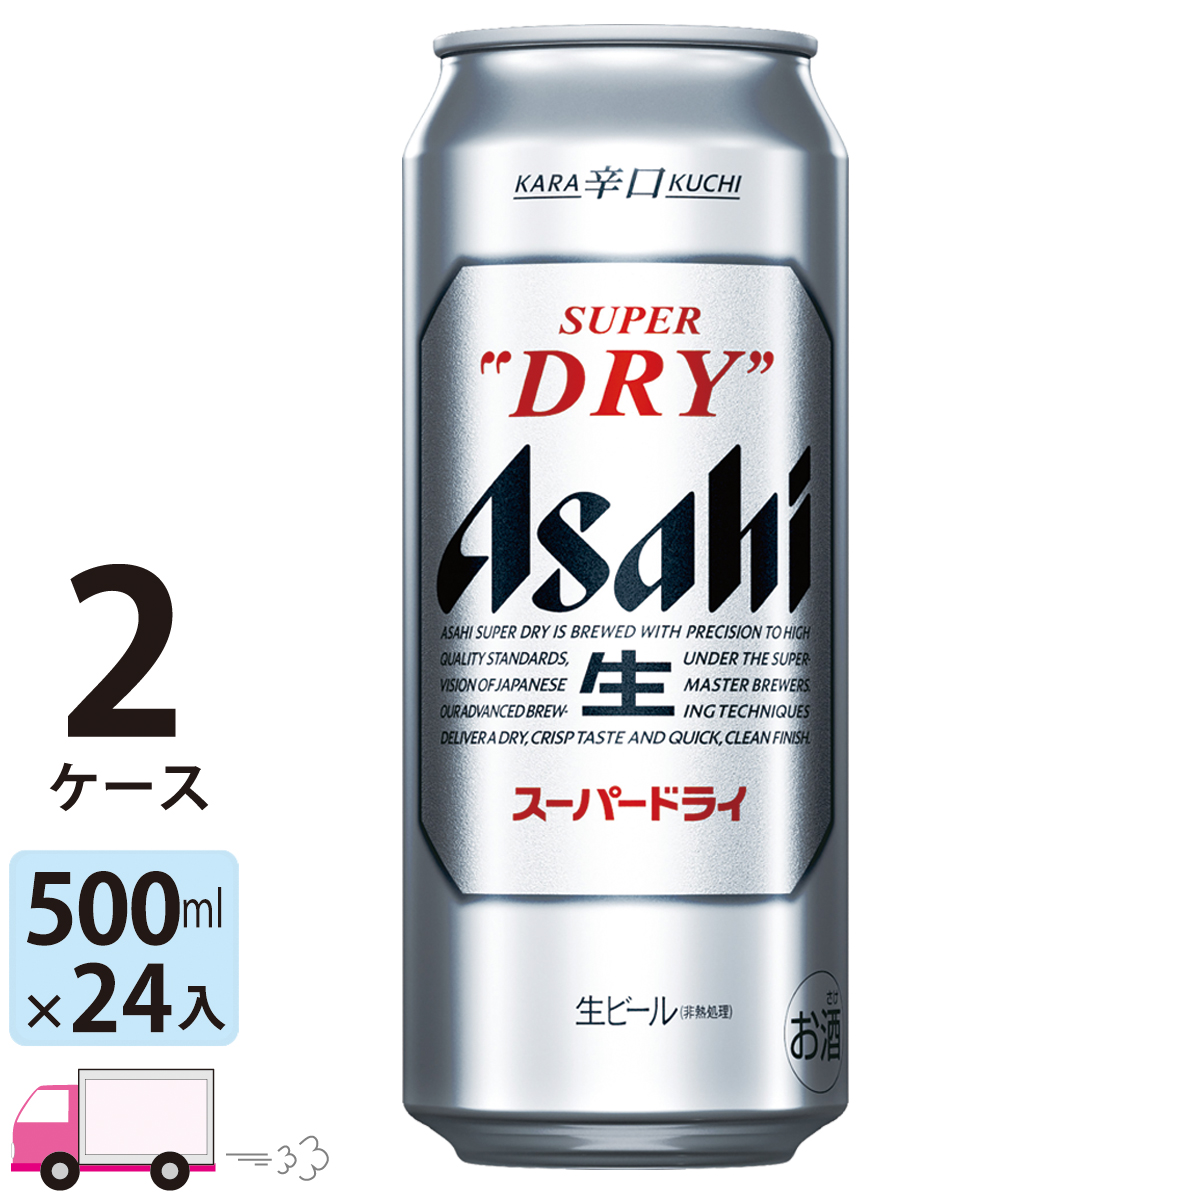  free shipping Asahi beer super dry 500ml 24 can go in 2 case (48ps.@)